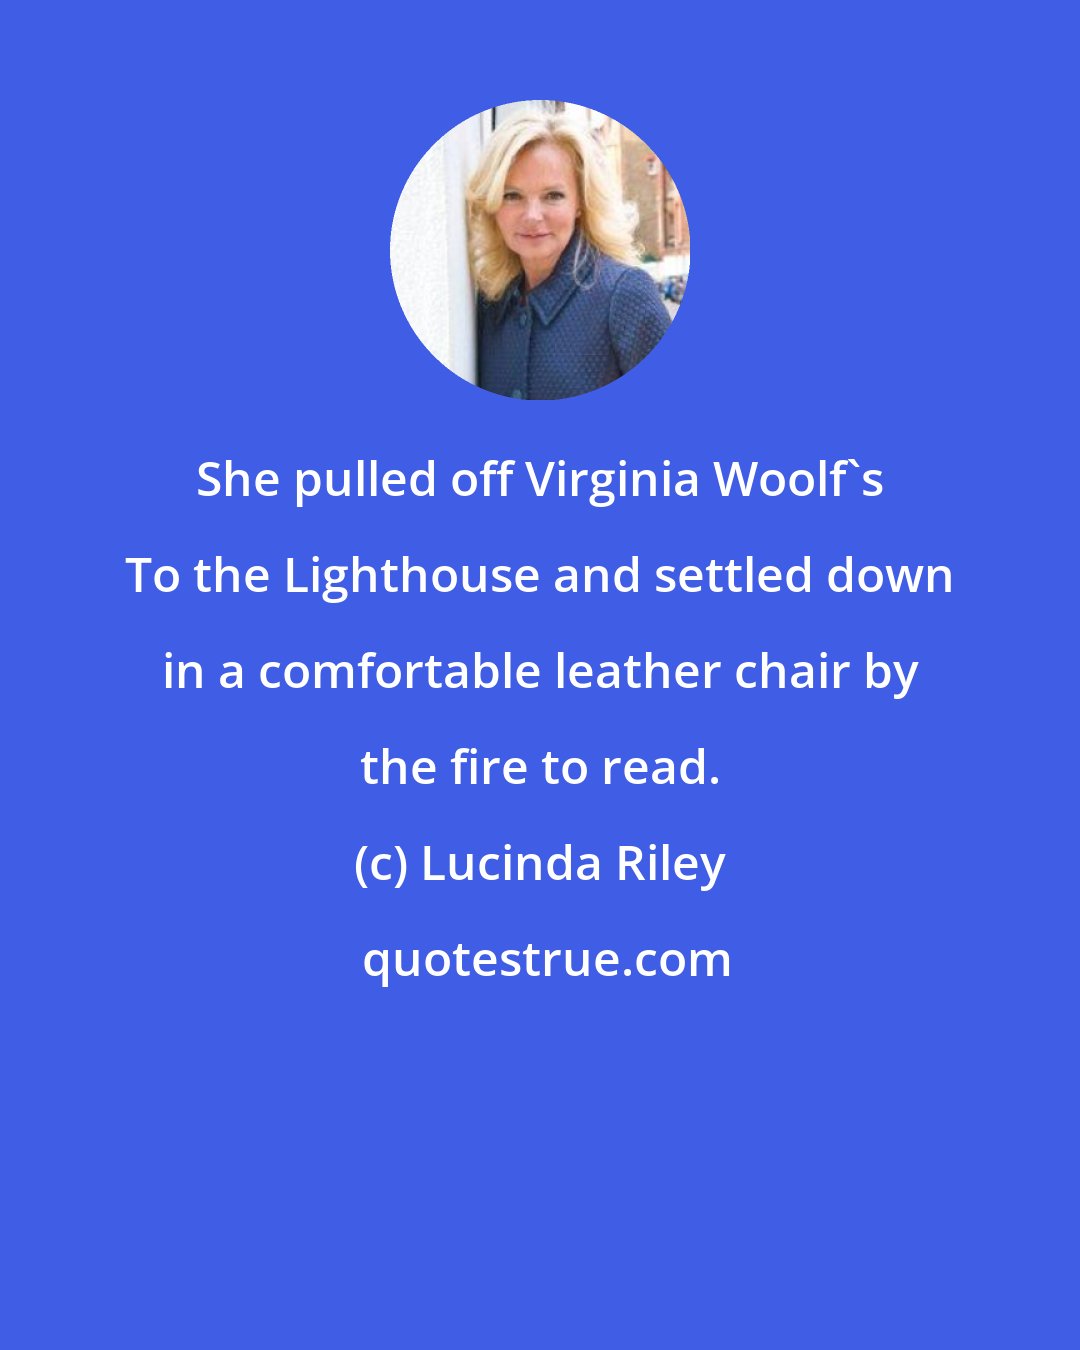 Lucinda Riley: She pulled off Virginia Woolf's To the Lighthouse and settled down in a comfortable leather chair by the fire to read.